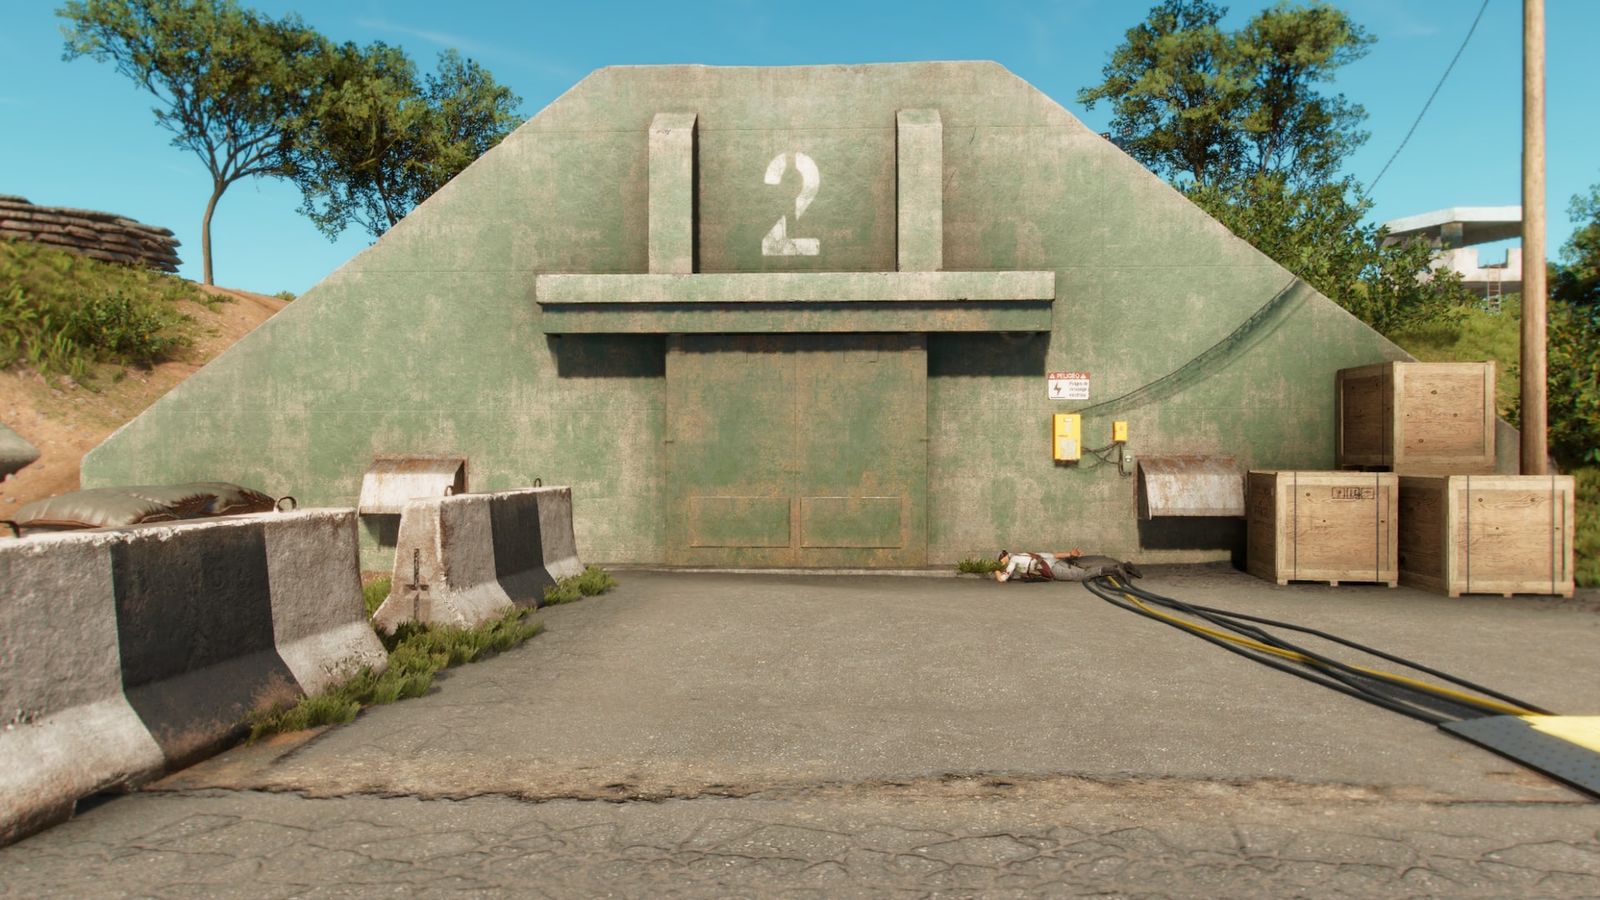 The bunker during Far Cry 6's 'Cache Money' Treasure Hunt that contains two easter eggs.